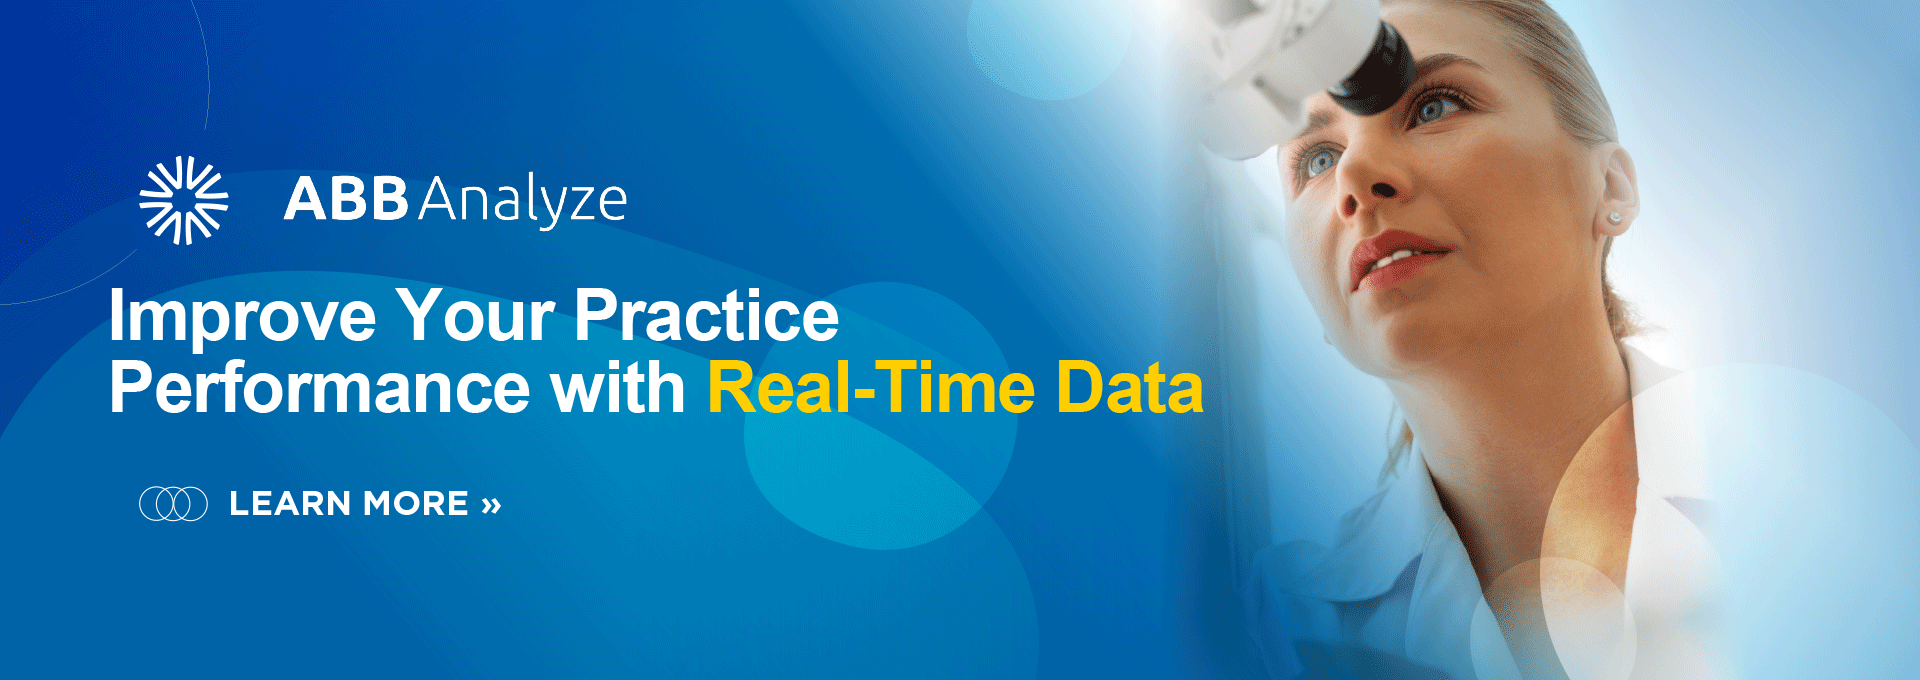 ABB Analyze - Improve Your Practice Performance with Real-Time Data - LEARN MORE »